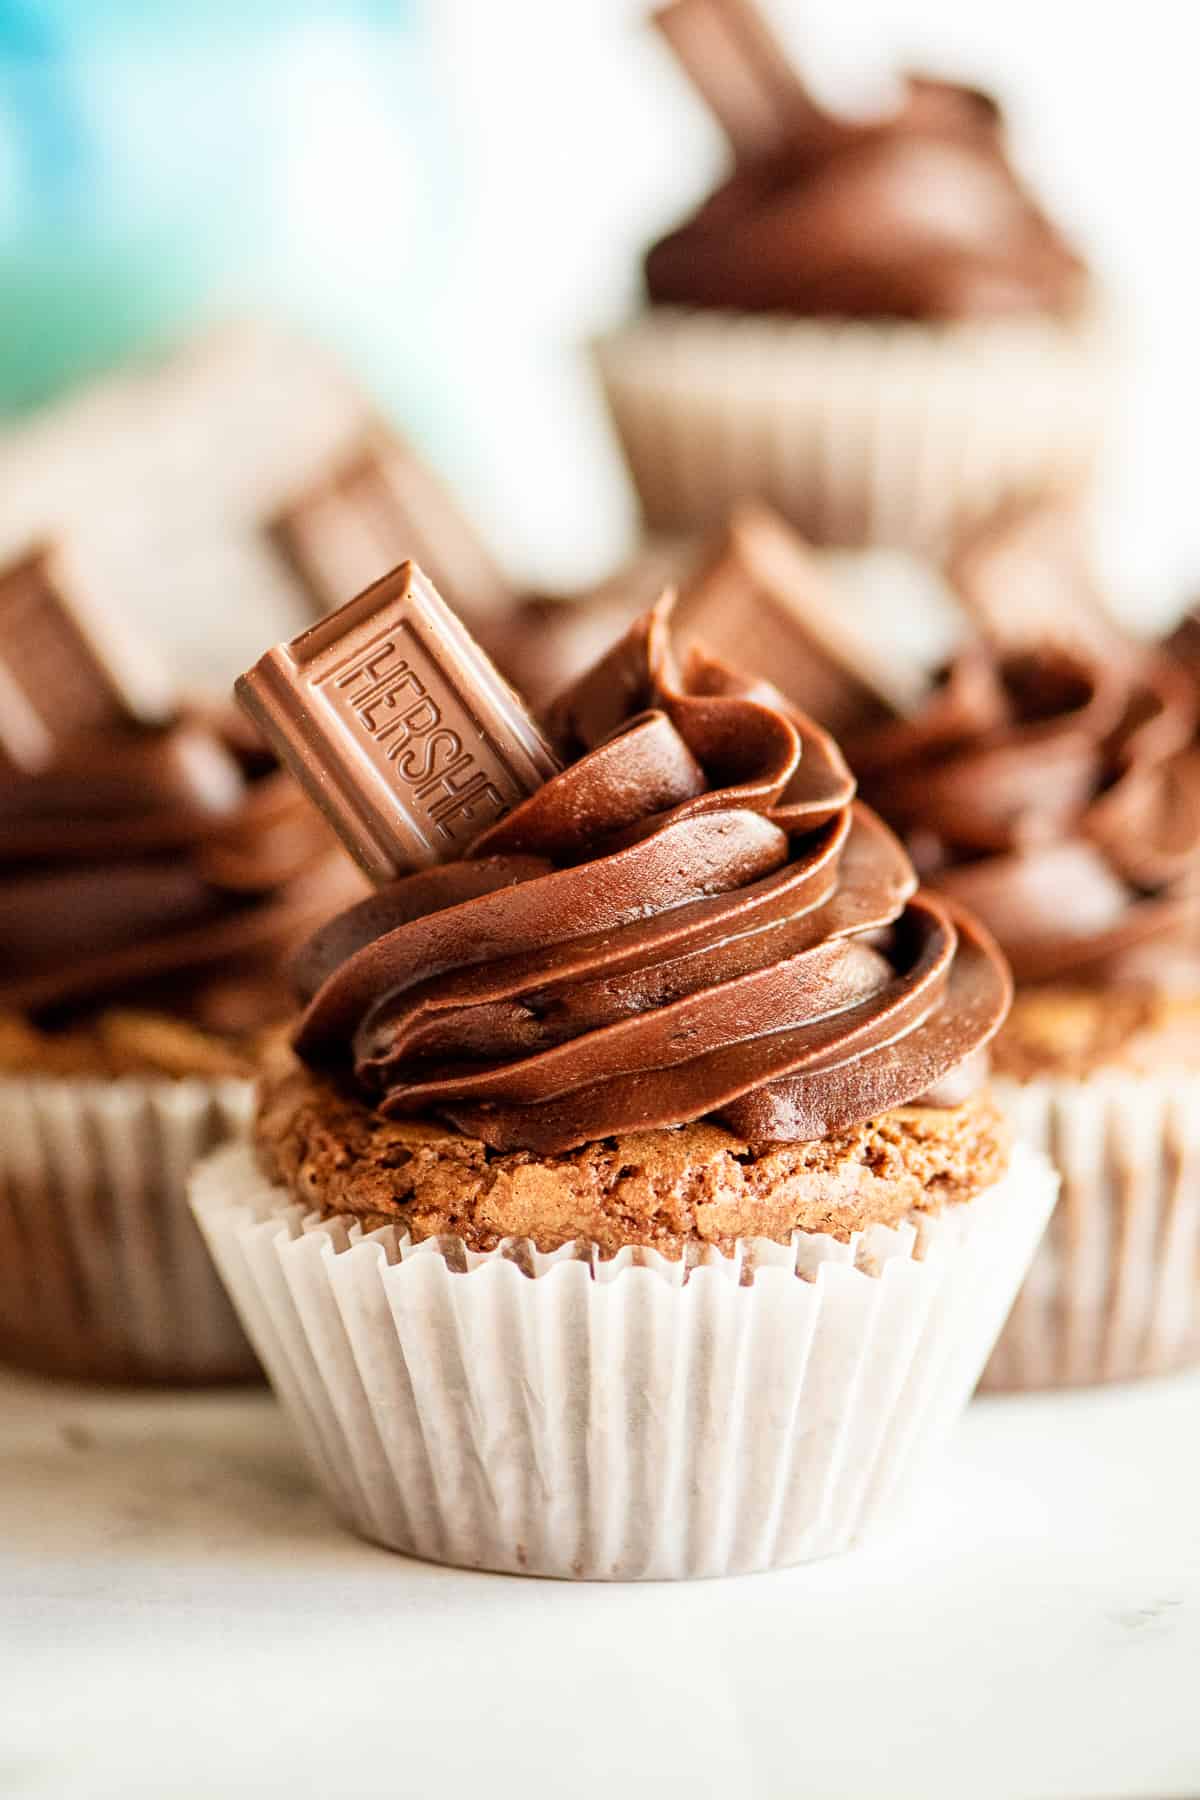 up close image of brownie cupcake with chocolate buttercream